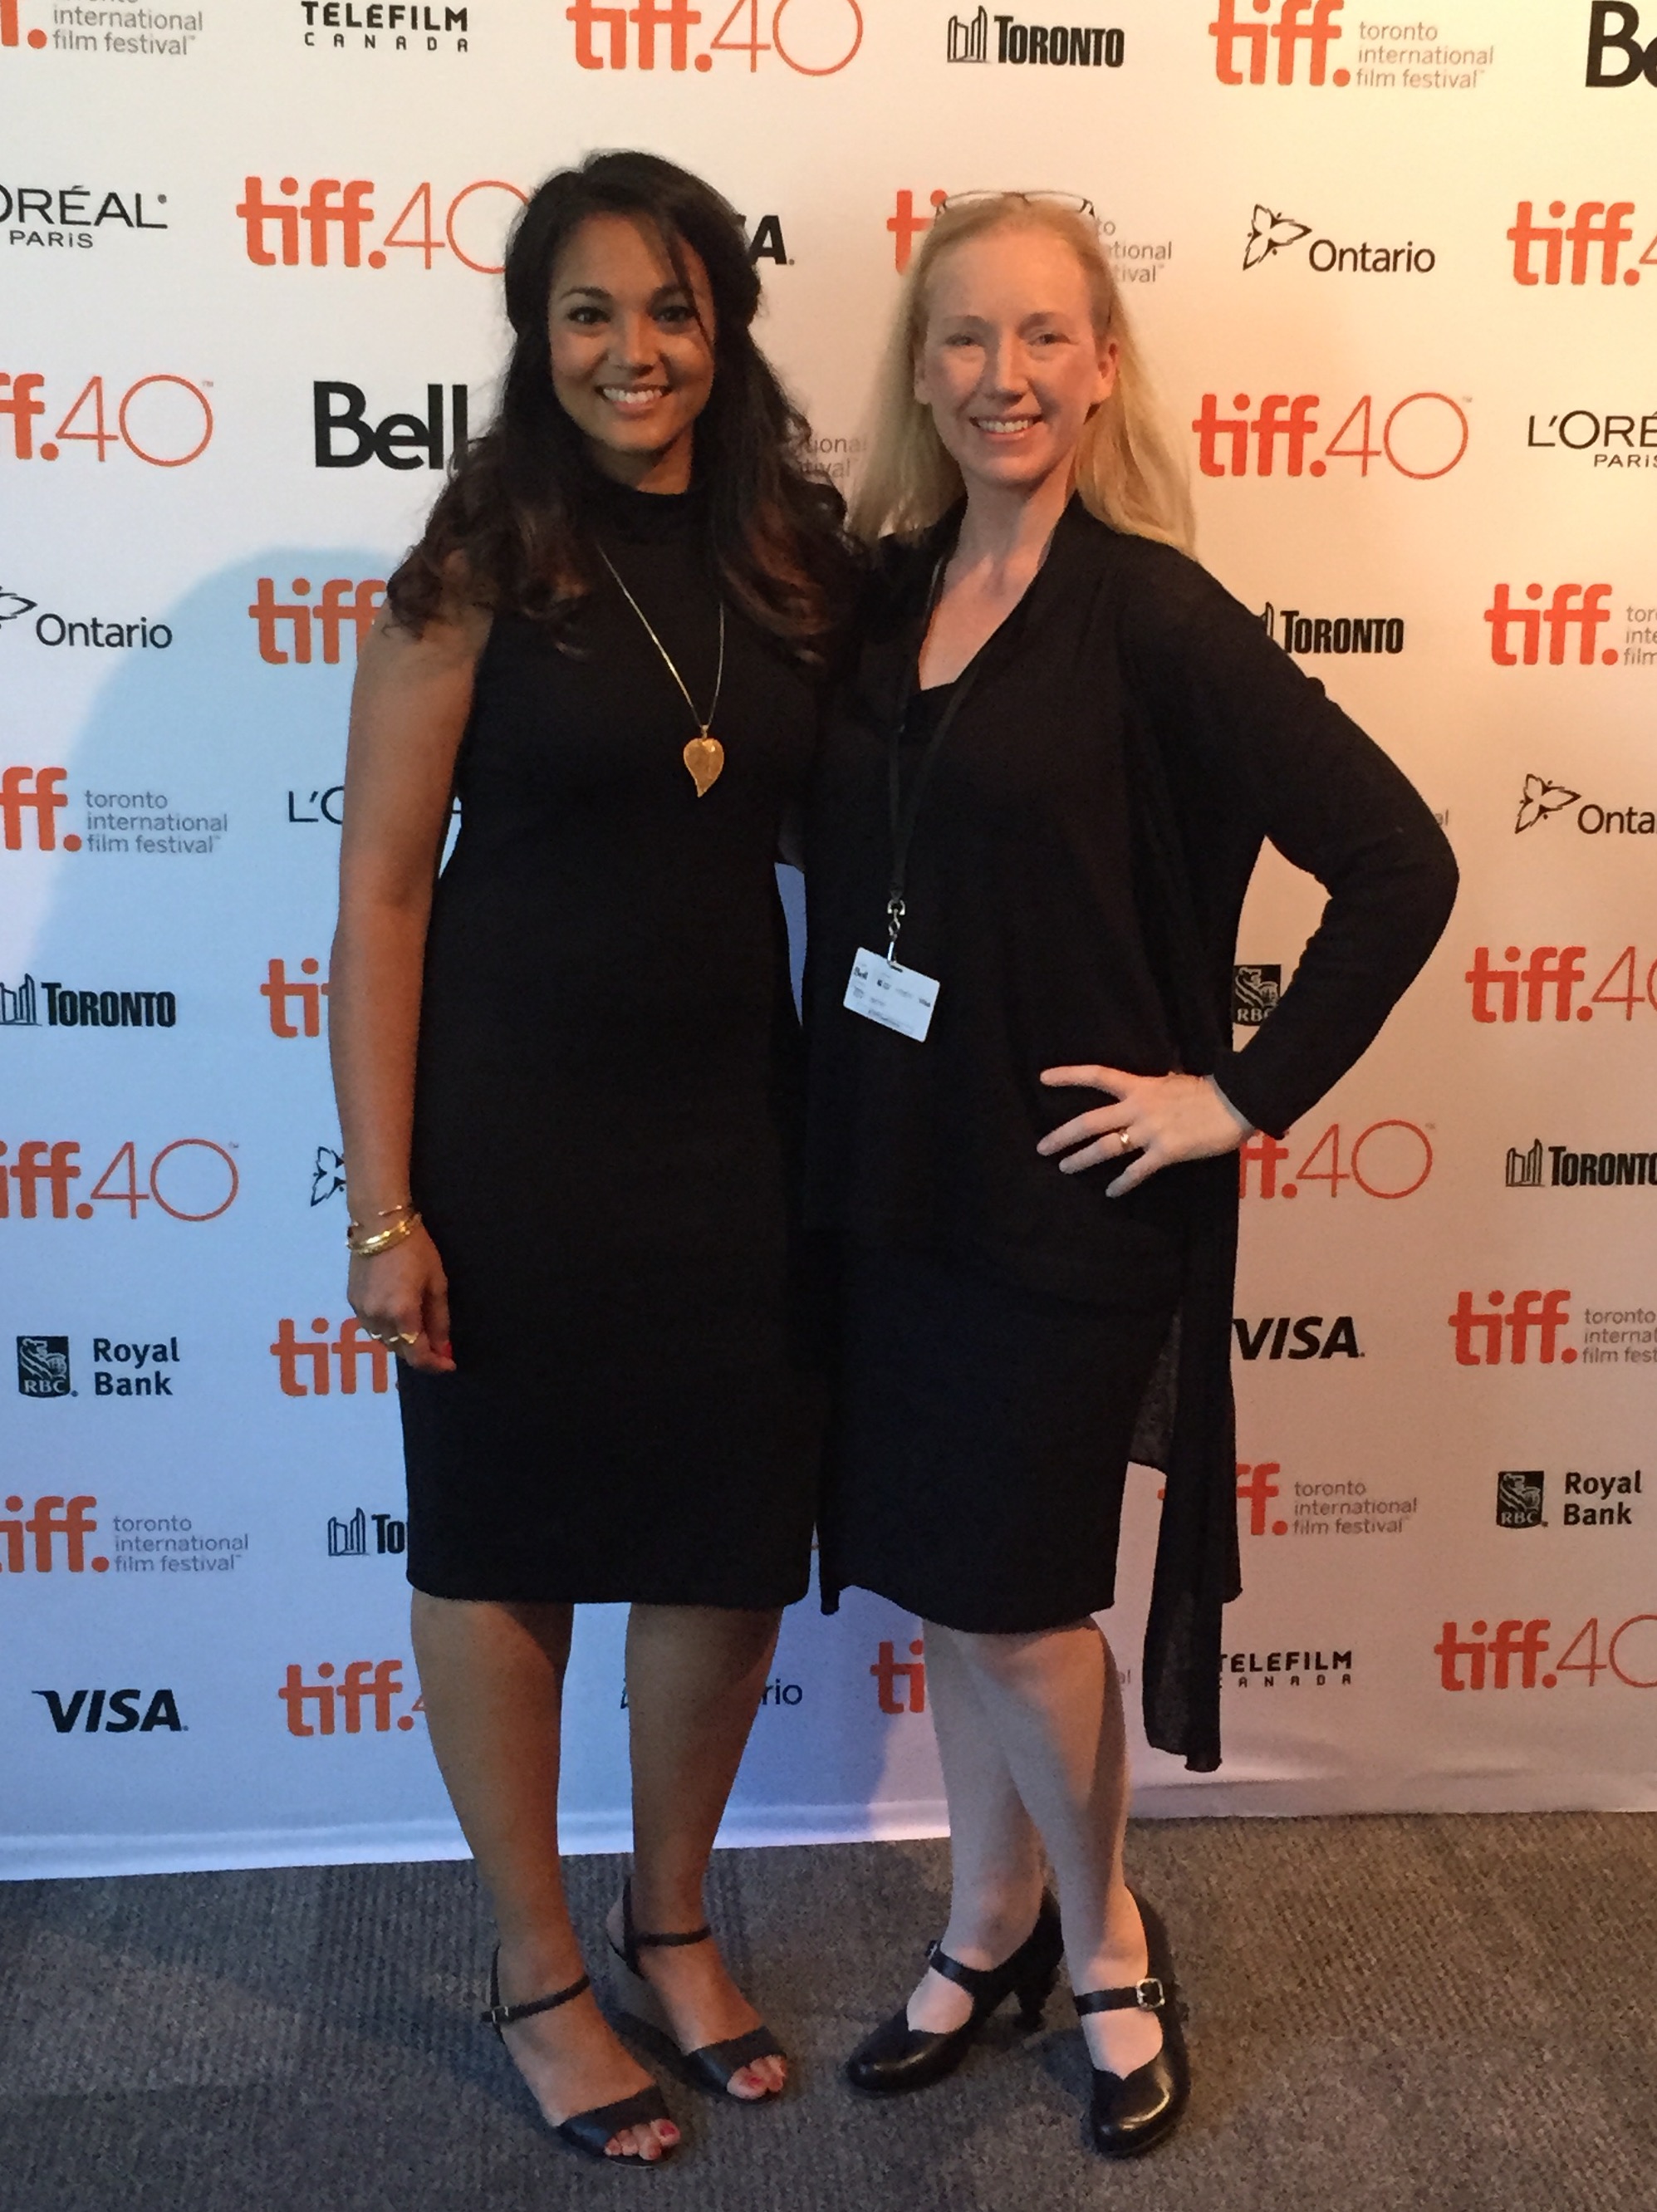 Amanda Burke at TIFF 2015 - representing Women in Film & Television. Here with producer Komal Mingas, after early morning panel discussion.